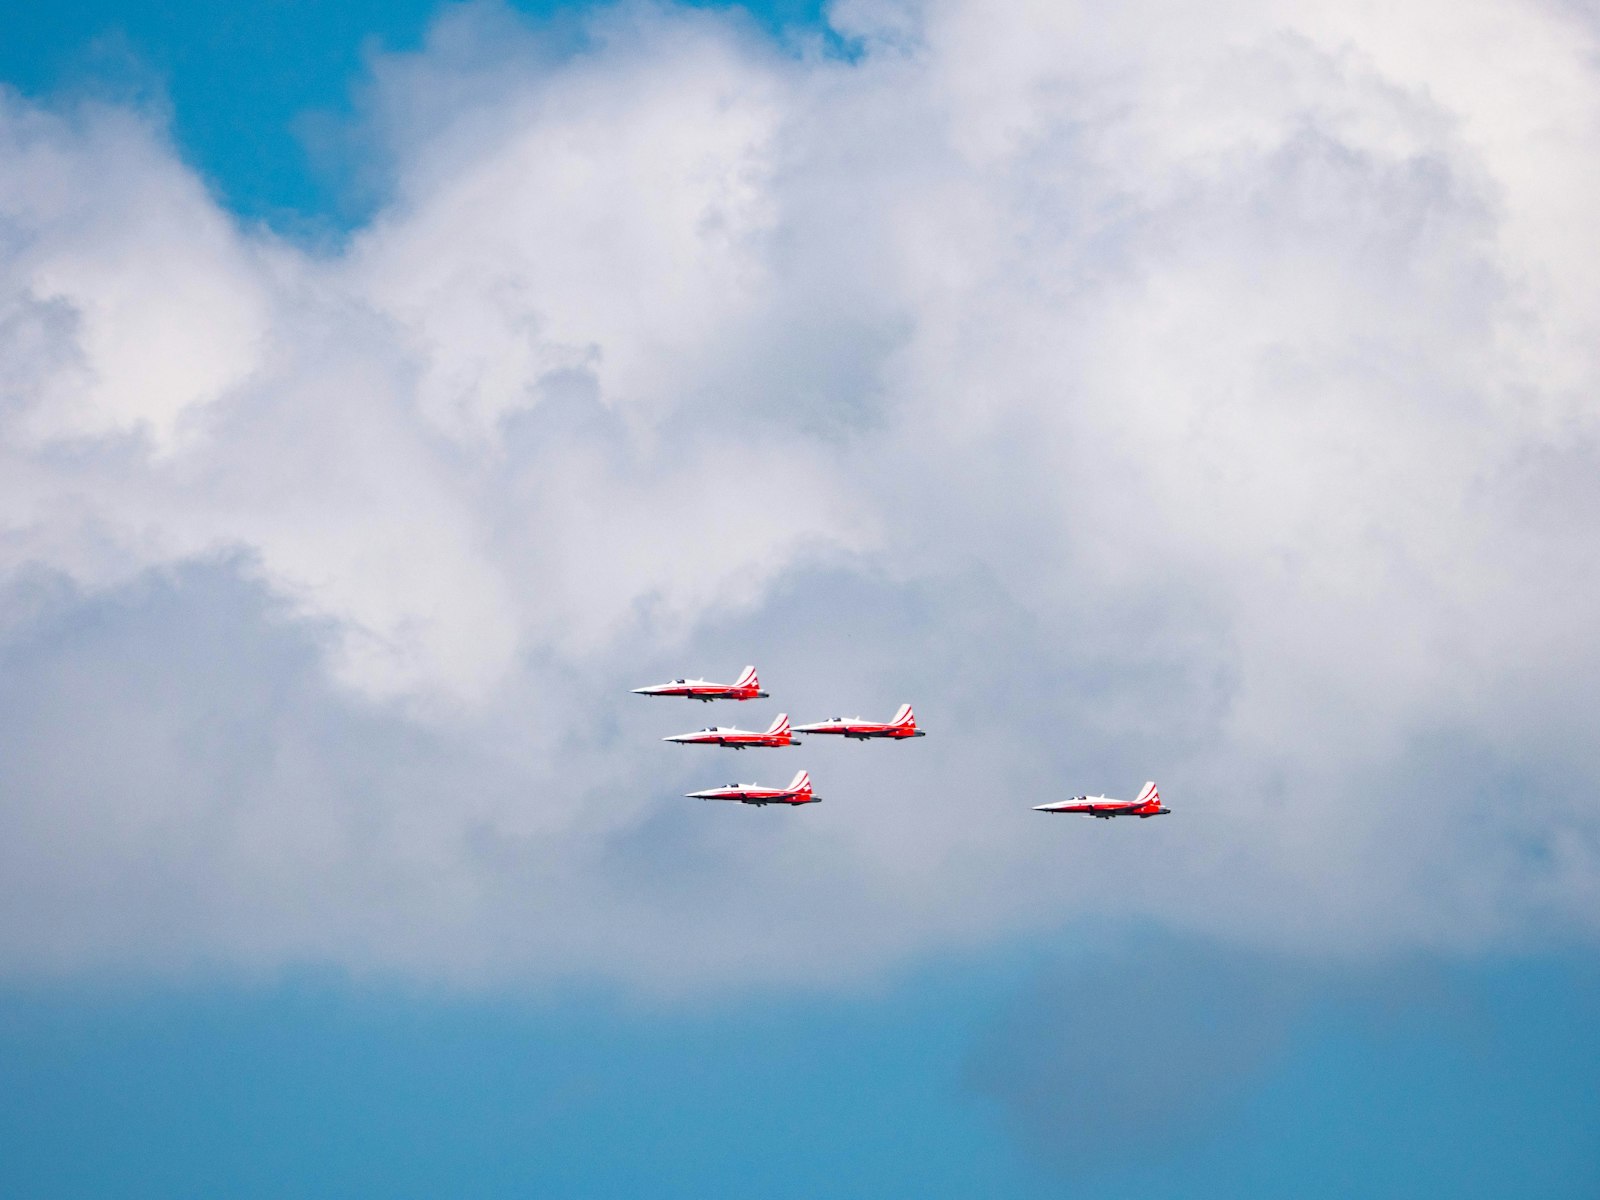 Panasonic Lumix DC-GH5 sample photo. Five red-and-white planes in photography